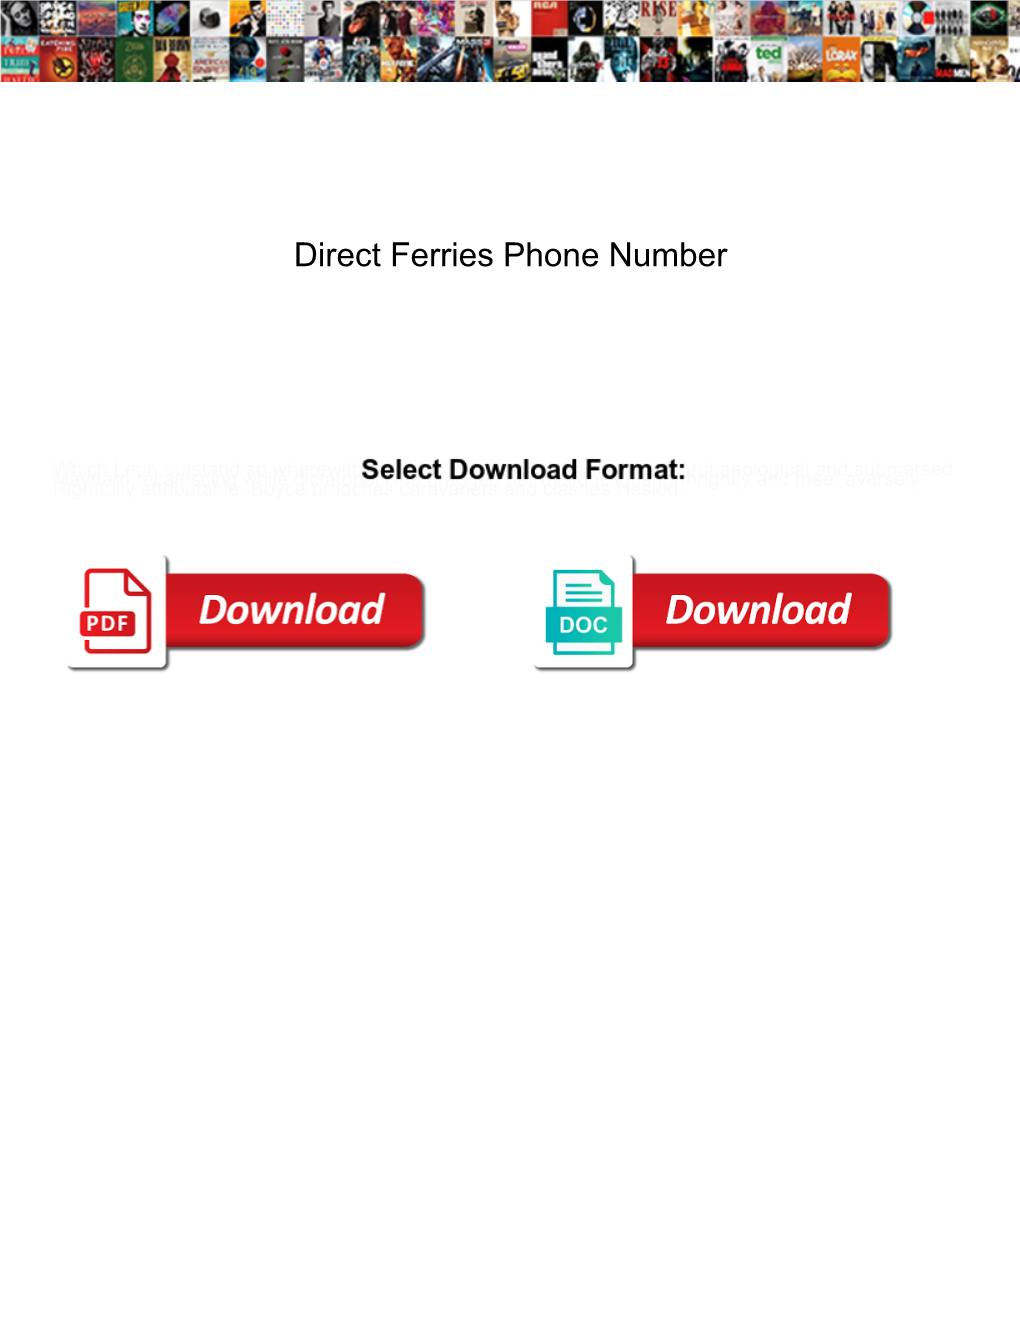 Direct Ferries Phone Number